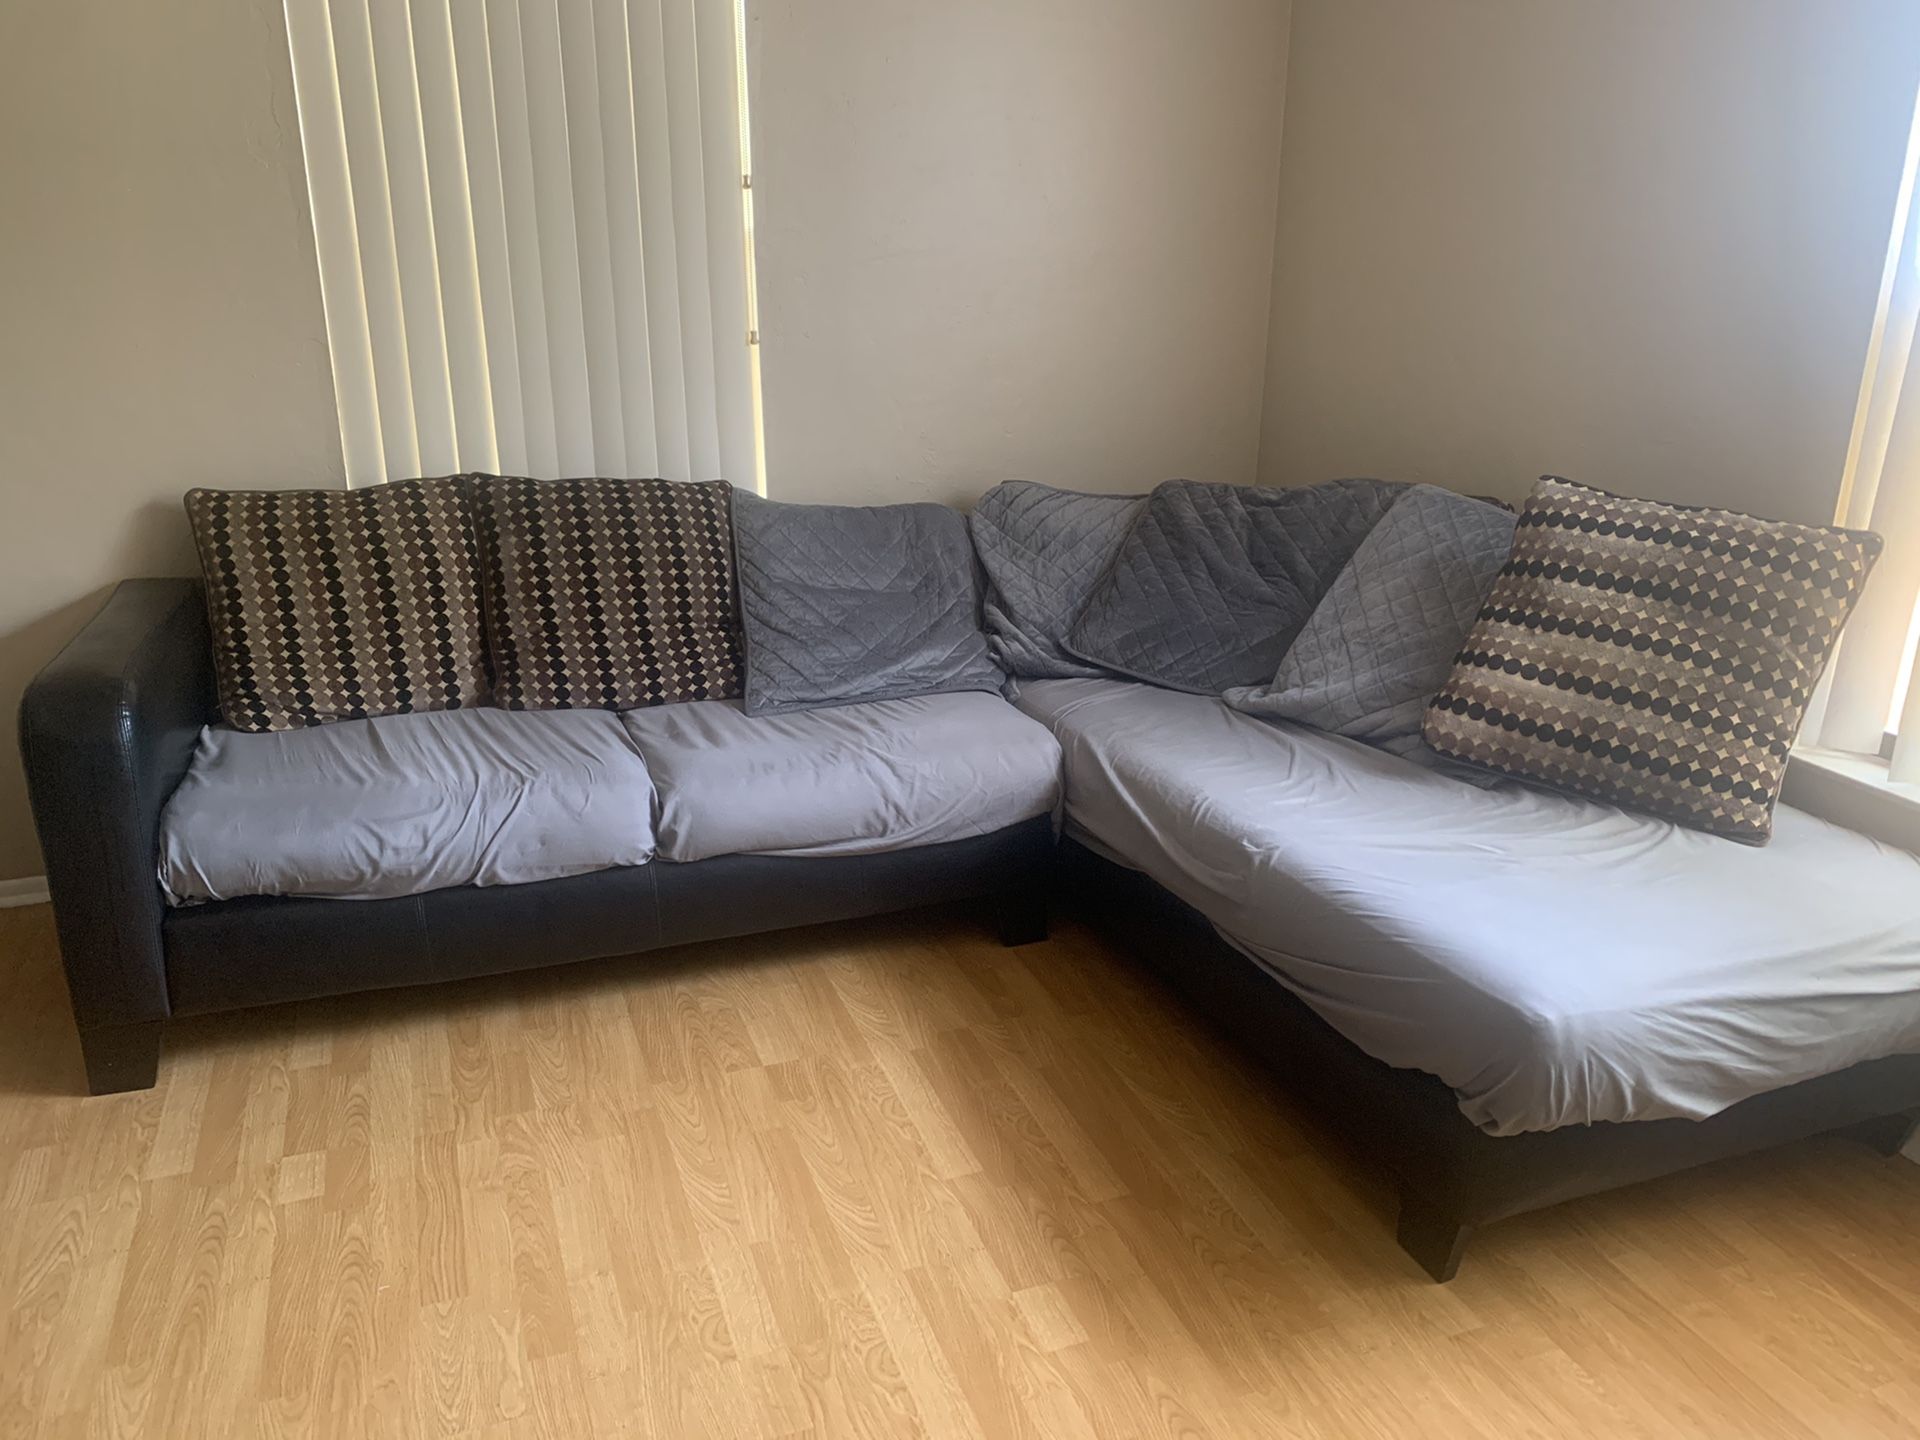 Sectional Couch w/ Pillows [Removable Pillows]